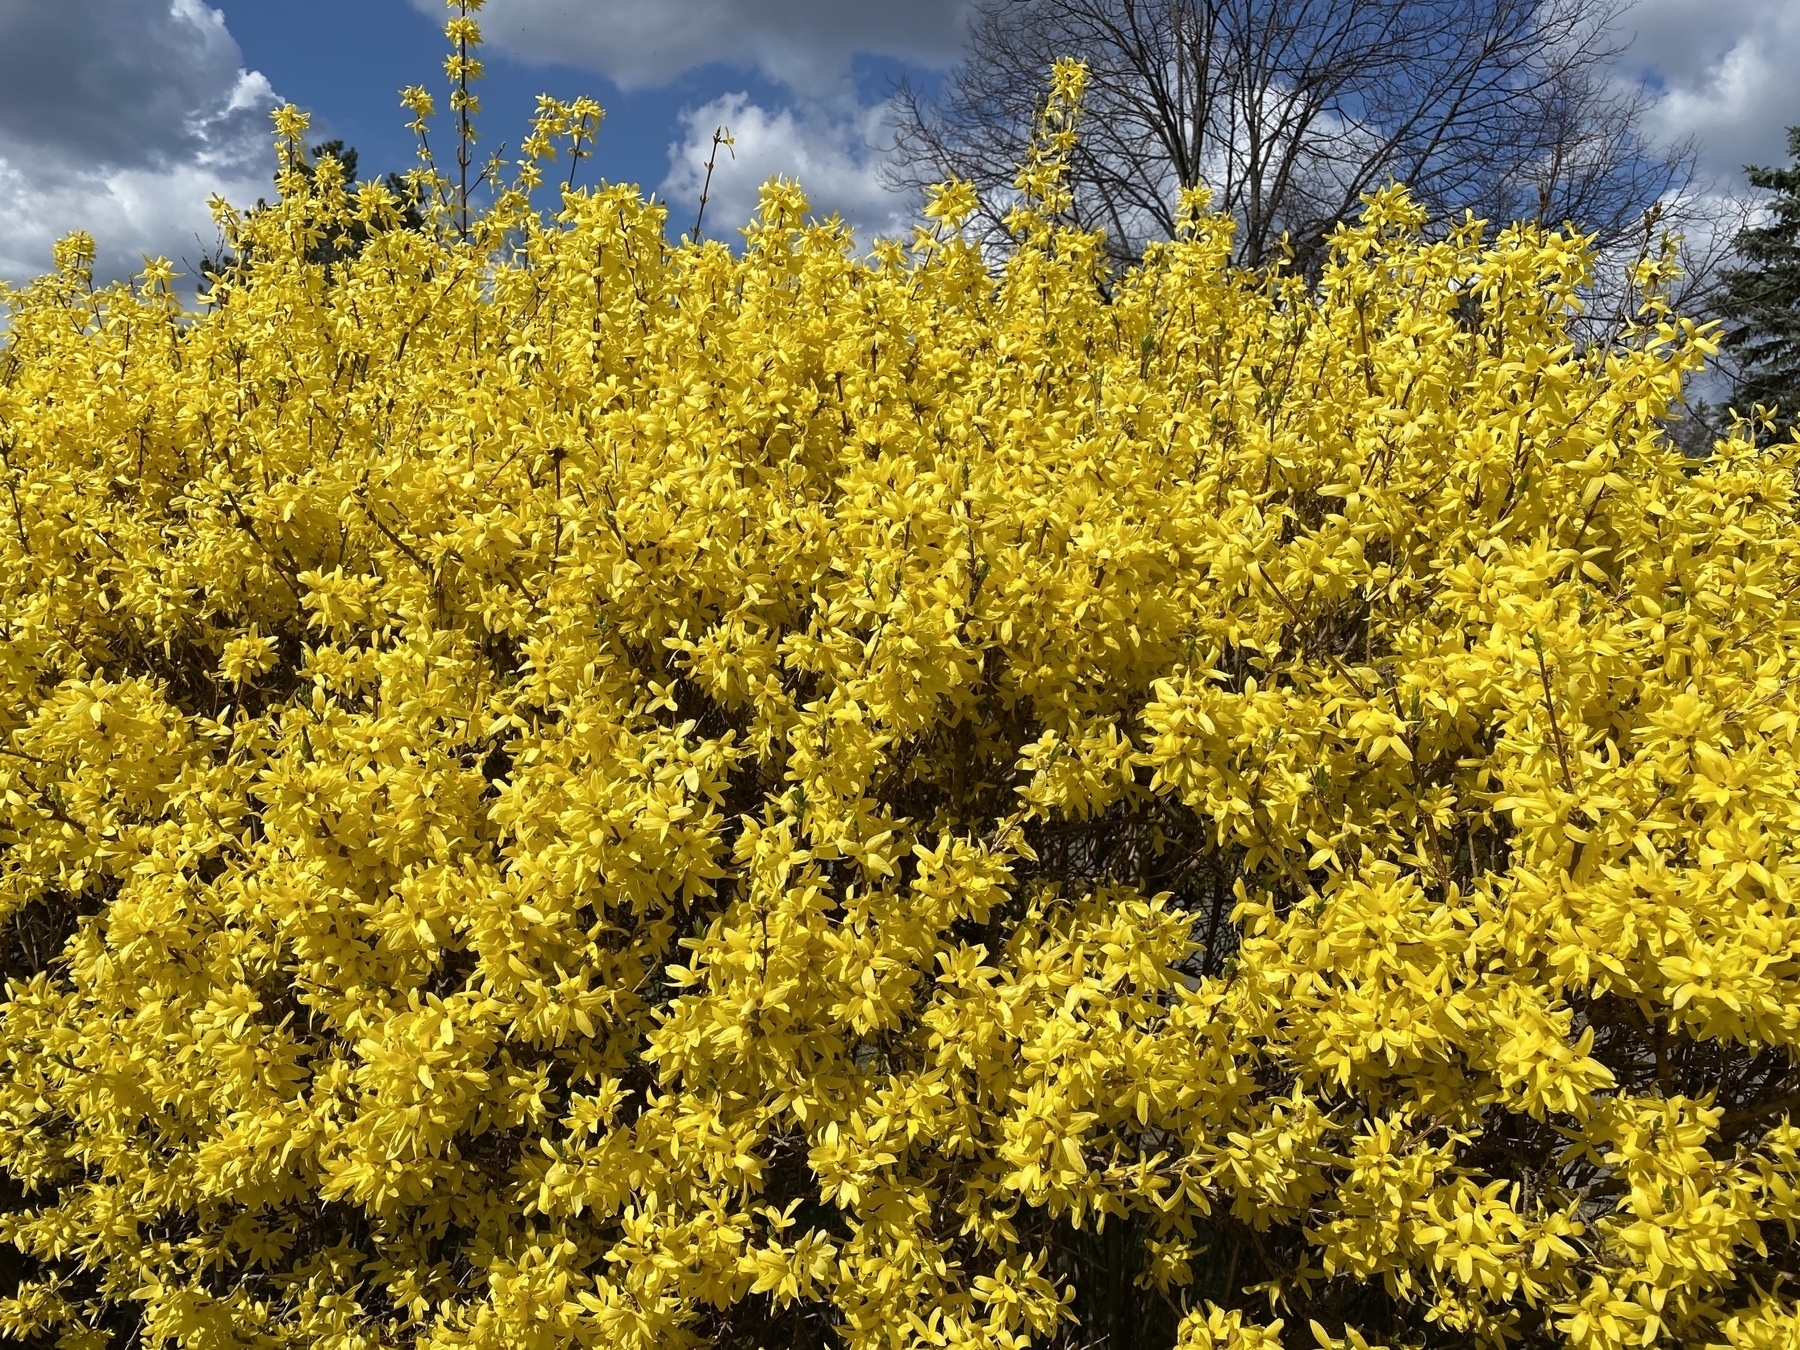 Tree covered in bright yellow flowers.